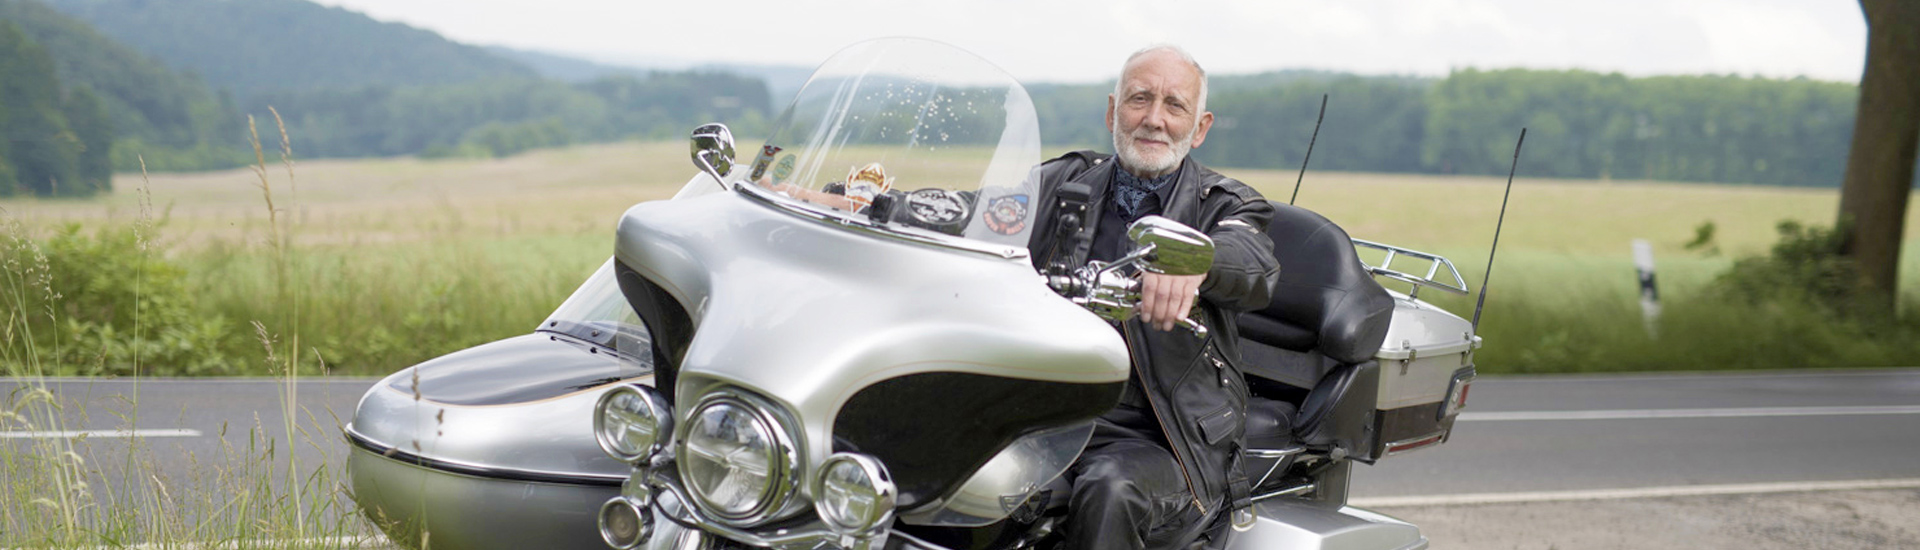 Man on a motorcycle with sidecar.